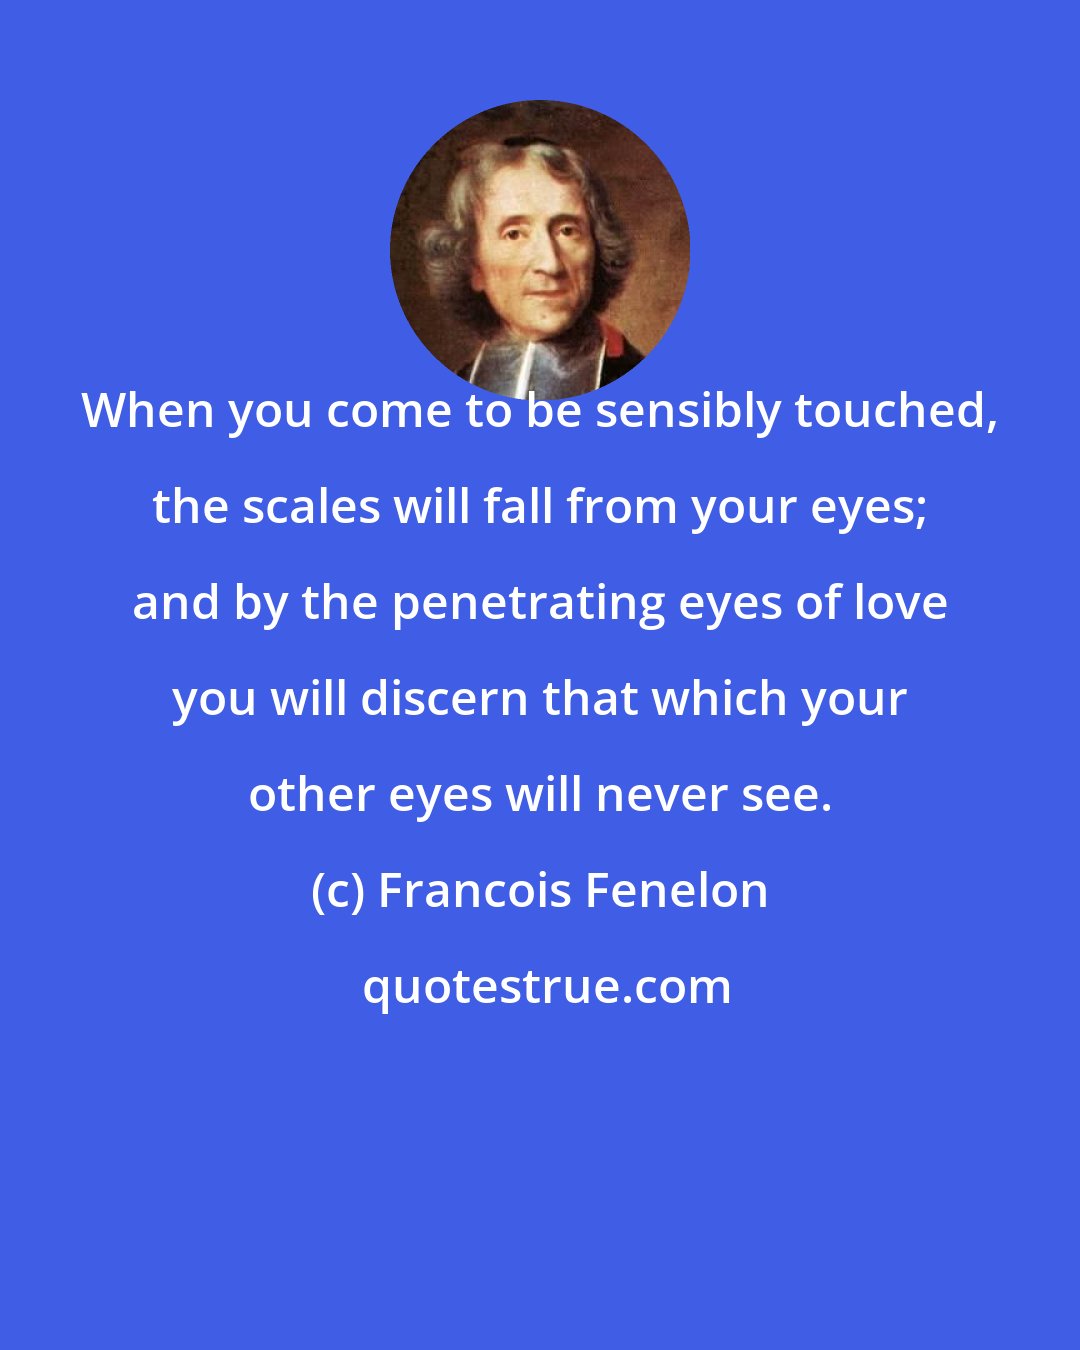 Francois Fenelon: When you come to be sensibly touched, the scales will fall from your eyes; and by the penetrating eyes of love you will discern that which your other eyes will never see.